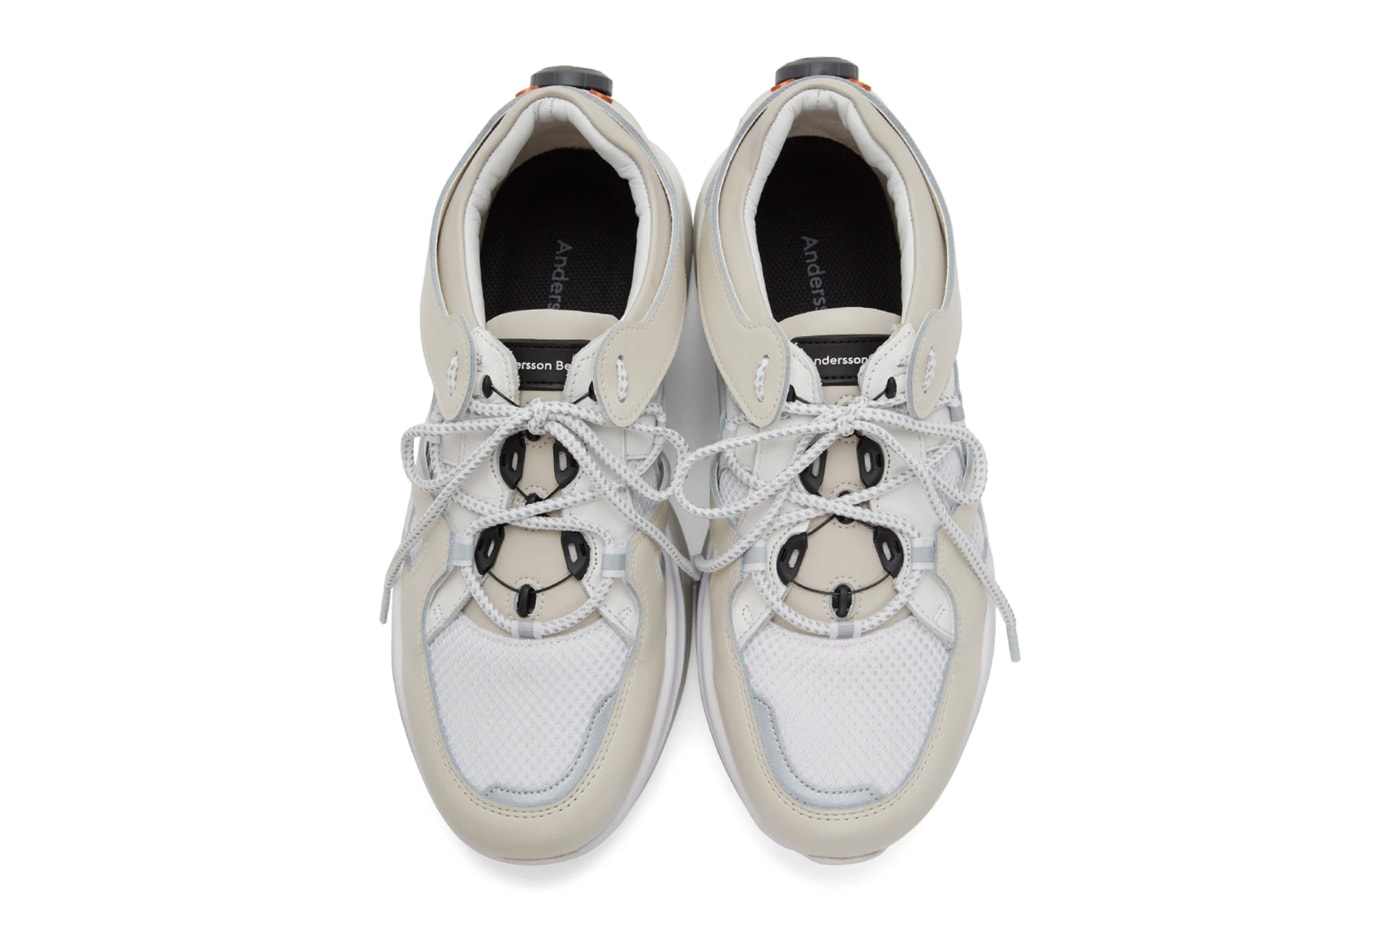 Andersson Bell White Runner Sneakers 201375M237016 Rollkin vibram footwear sneakers kicks trainers runners shoes technical fall winter 2020 collection made in south korea technical